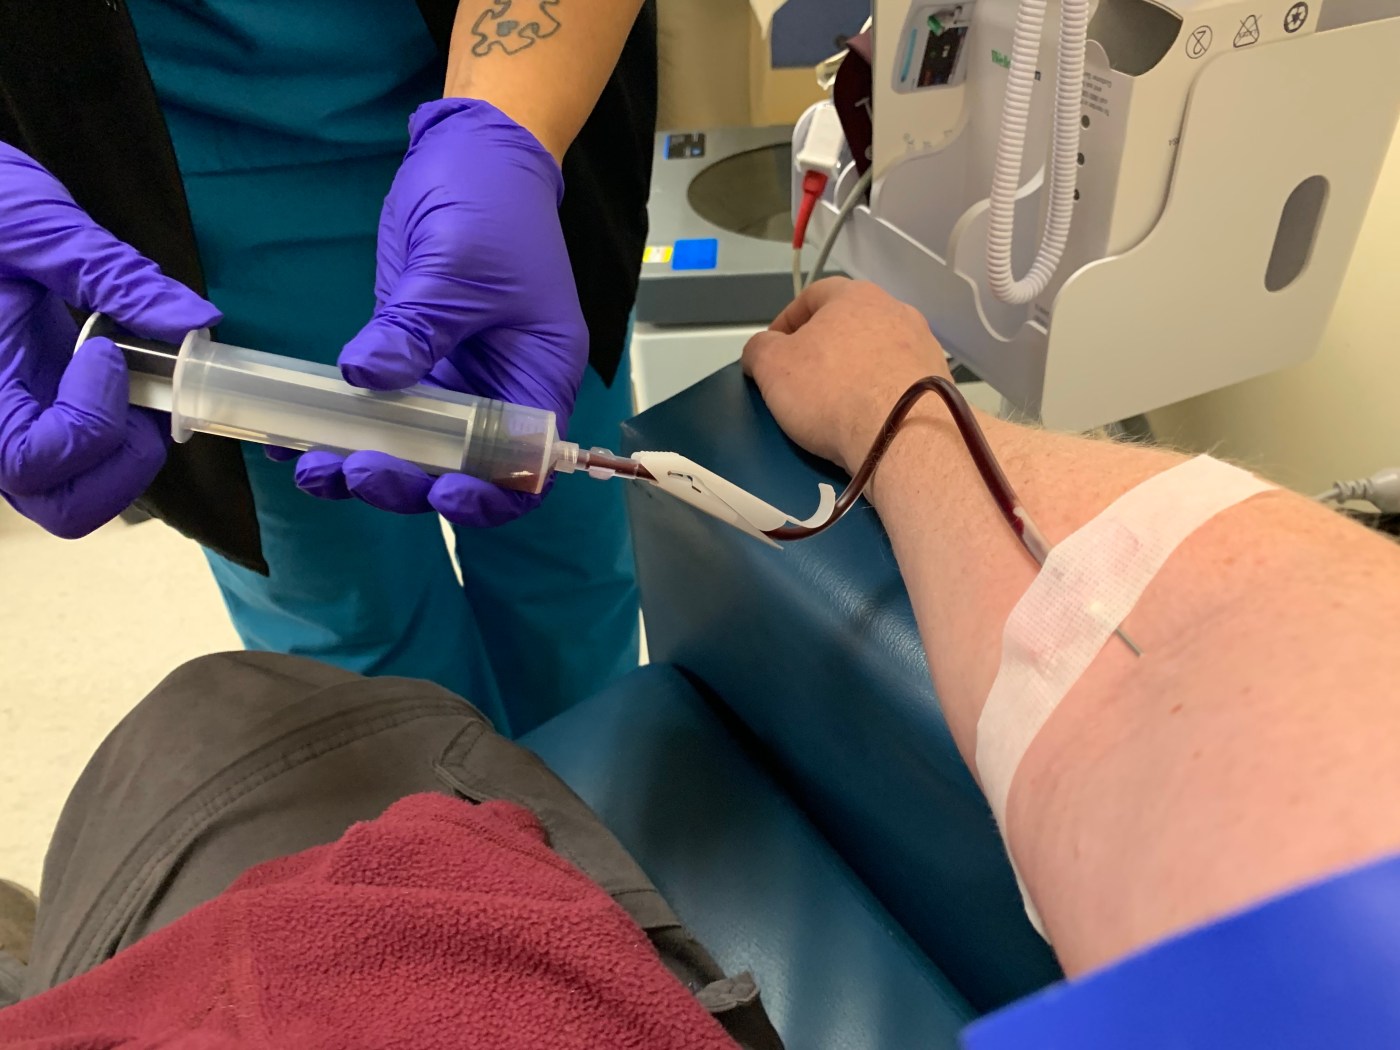 Blood donation is critical during COVID-19.